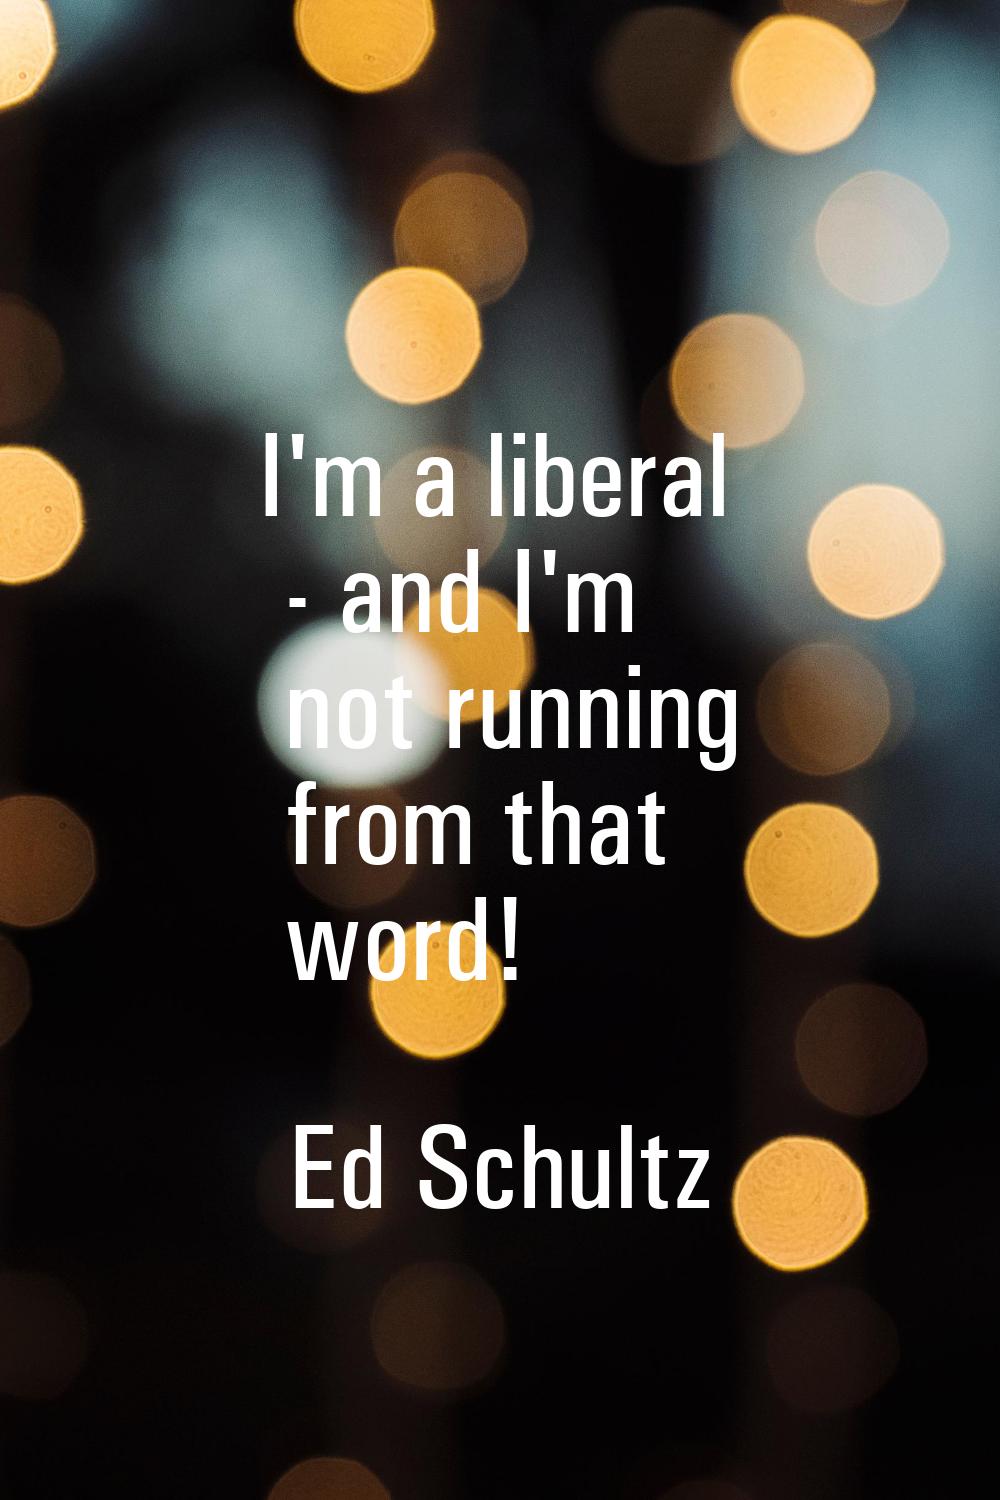 I'm a liberal - and I'm not running from that word!